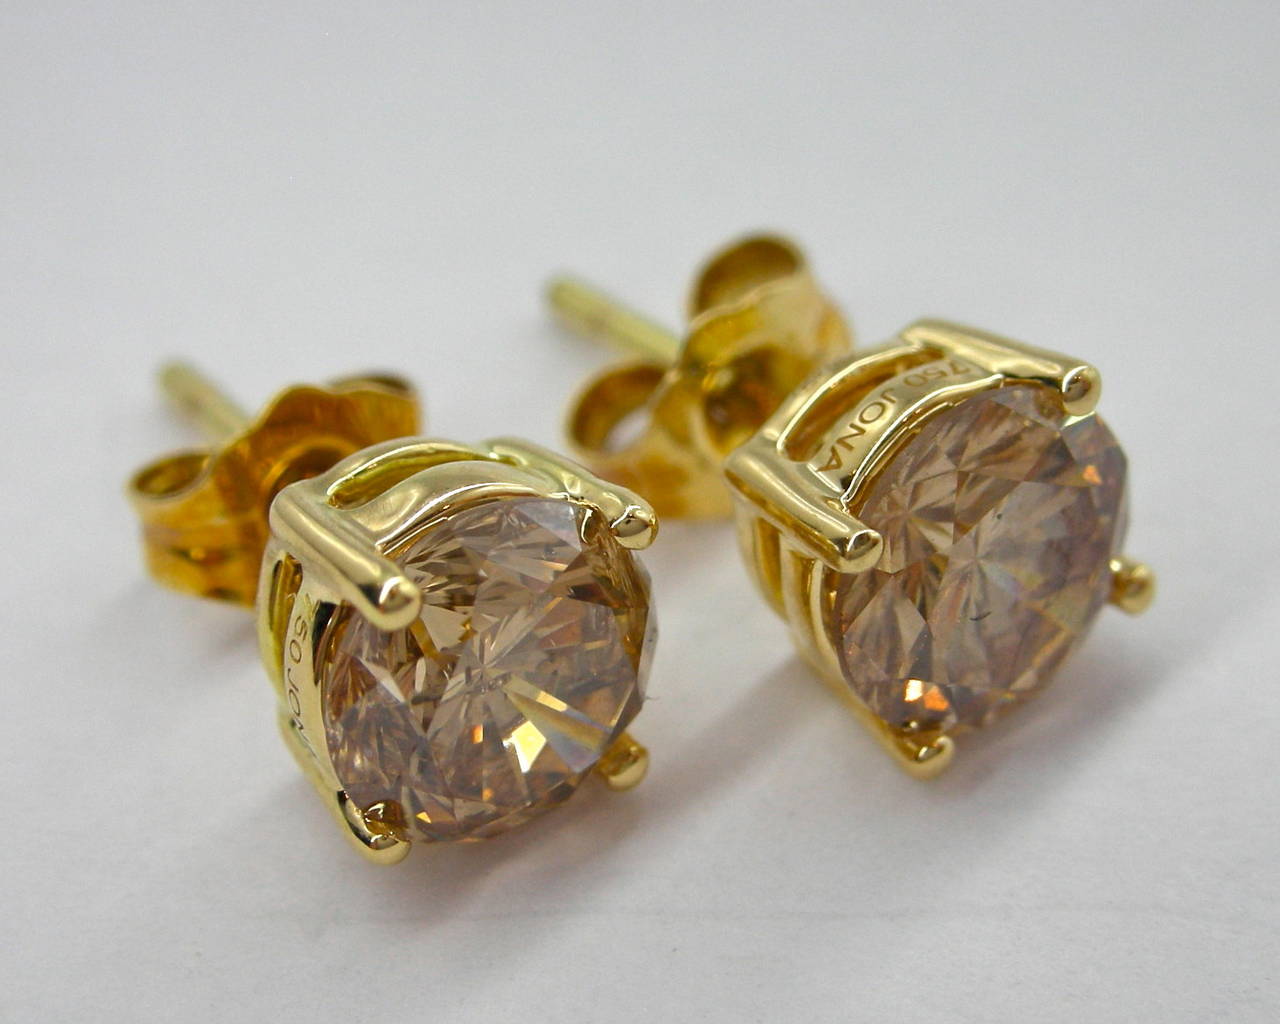 Jona, 18 karat yellow gold, round brilliant cut brown diamond stud earrings, showcasing a pair of brilliant cut brown diamonds weighing 1.04 and 1.06 .

All of our jewelry is new and has never been previously owned or worn.